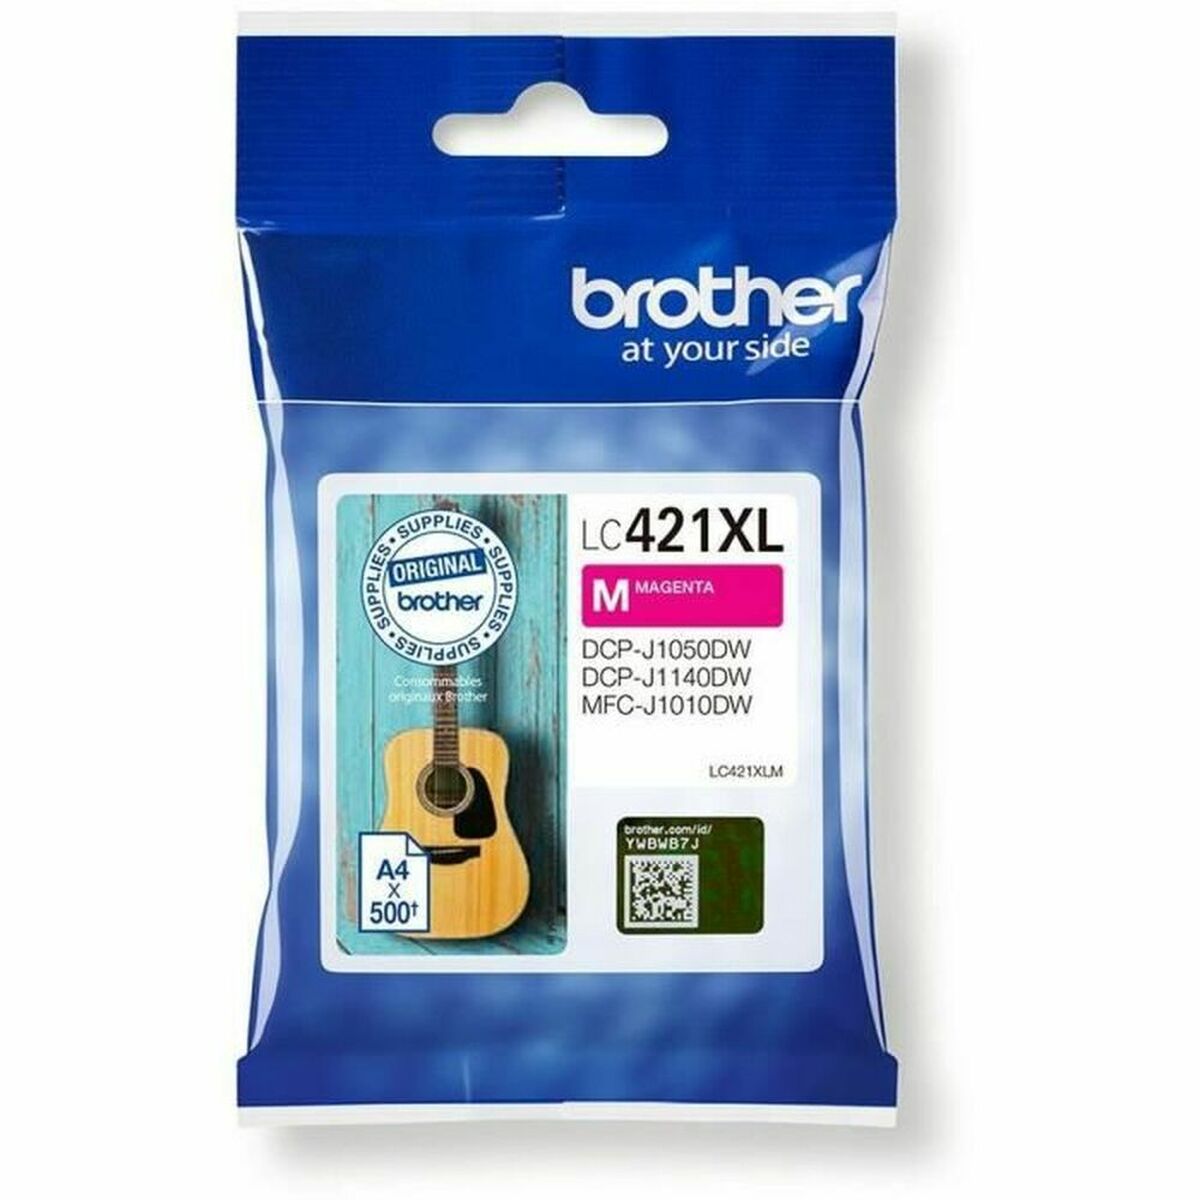 Original Ink Cartridge Brother LC-421XLM Magenta, Brother, Computing, Printers and accessories, original-ink-cartridge-brother-lc-421xlm-magenta, Brand_Brother, category-reference-2609, category-reference-2642, category-reference-2874, category-reference-t-19685, category-reference-t-19911, category-reference-t-21377, category-reference-t-25688, Condition_NEW, office, Price_20 - 50, Teleworking, RiotNook